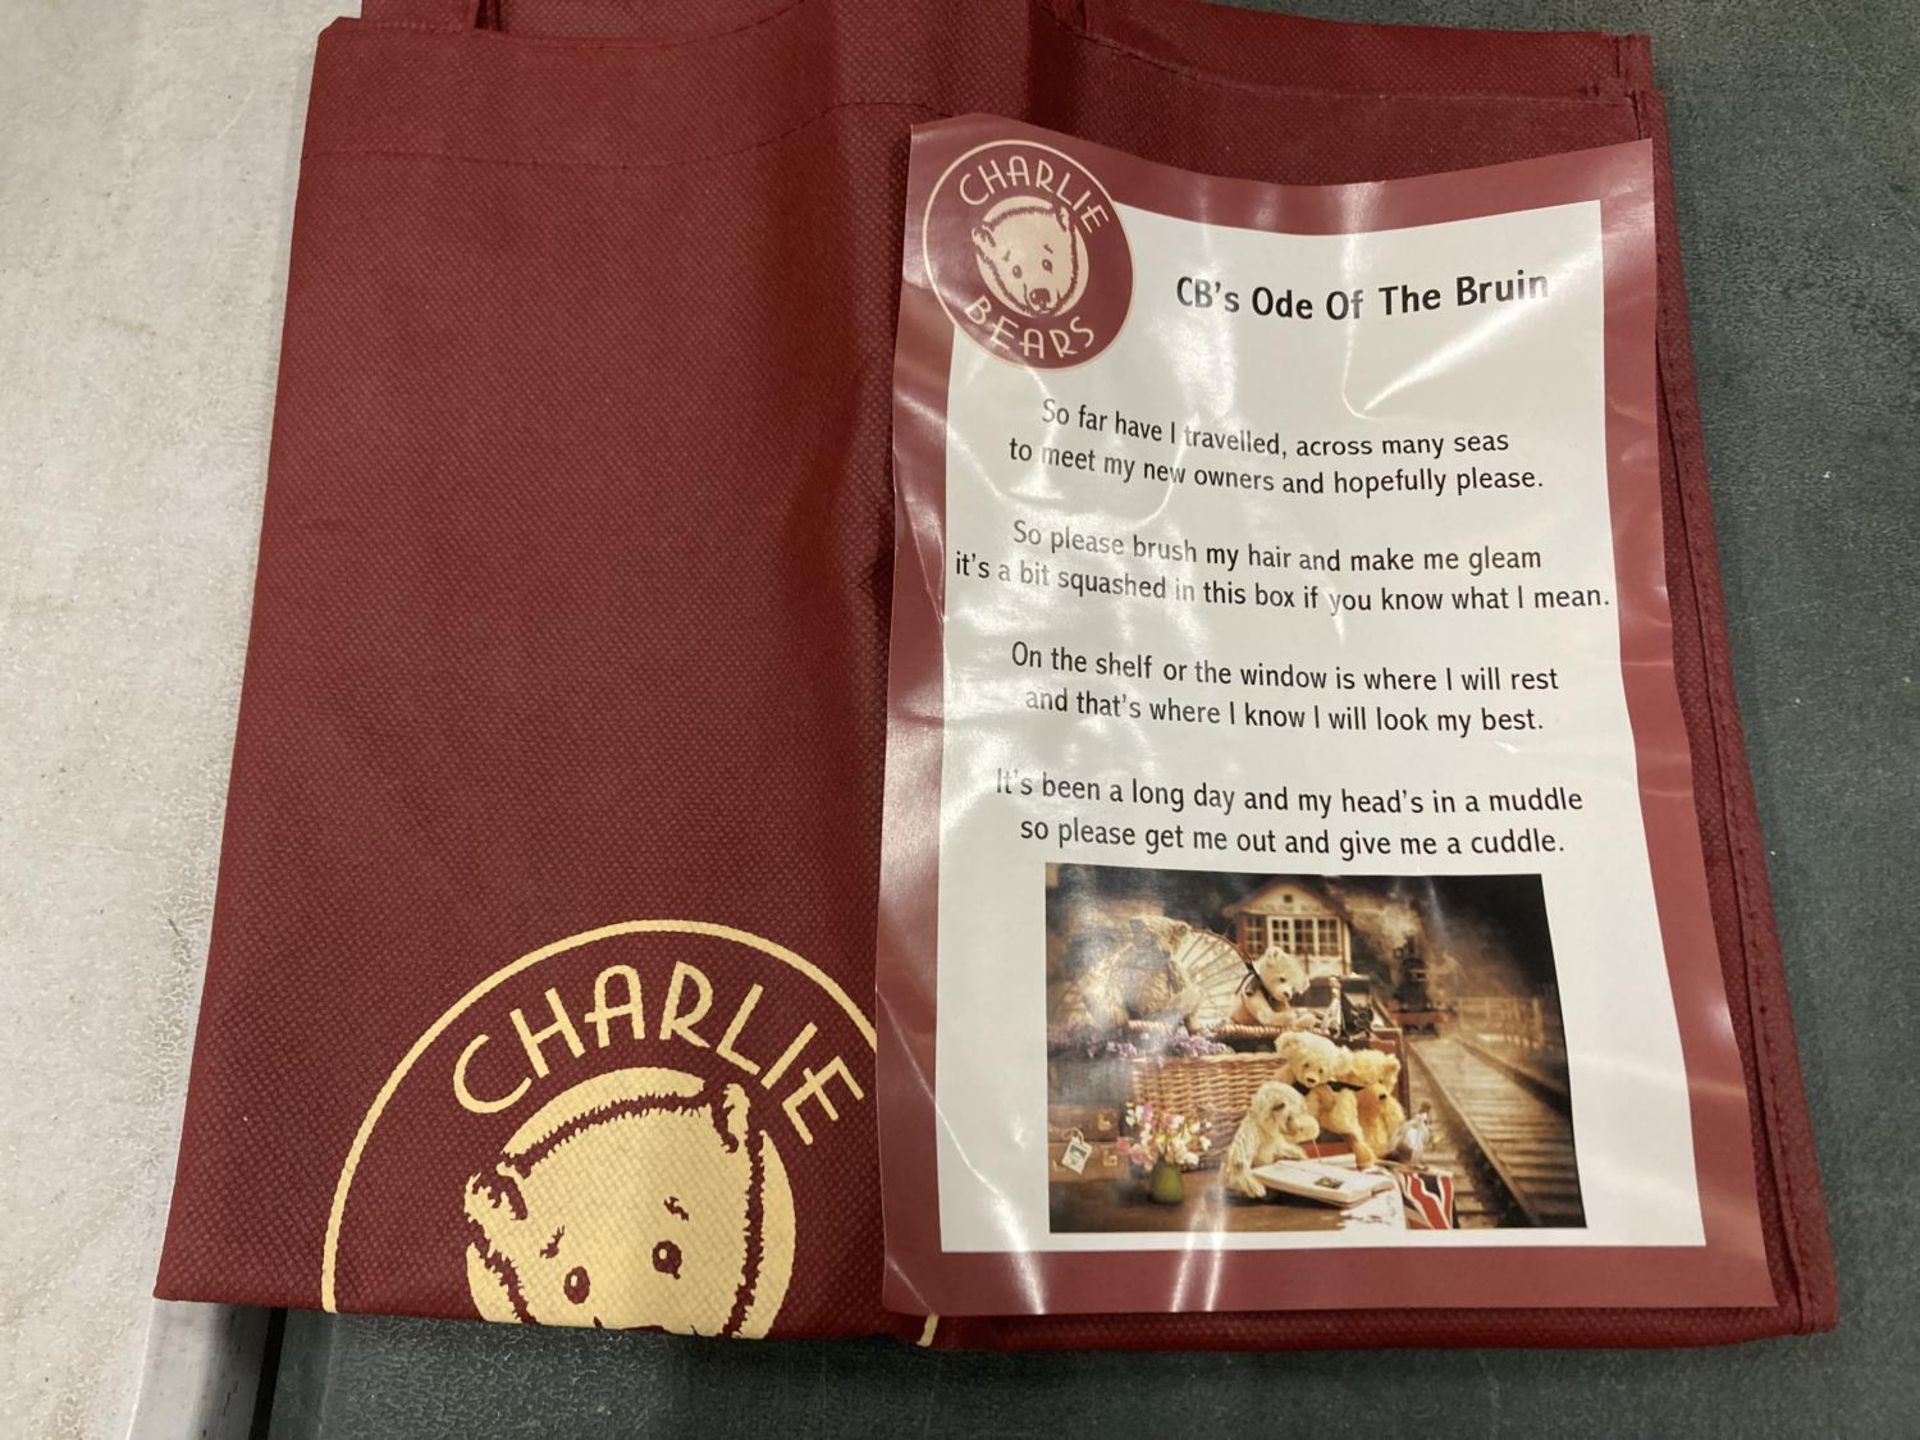 A LIMITED EDITION 279/4000 CHARLIE BEAR 'SHARDUL' COMPLETE WITH BAG AND CERTIFICATE OF AUTHENTICITY - Image 3 of 4